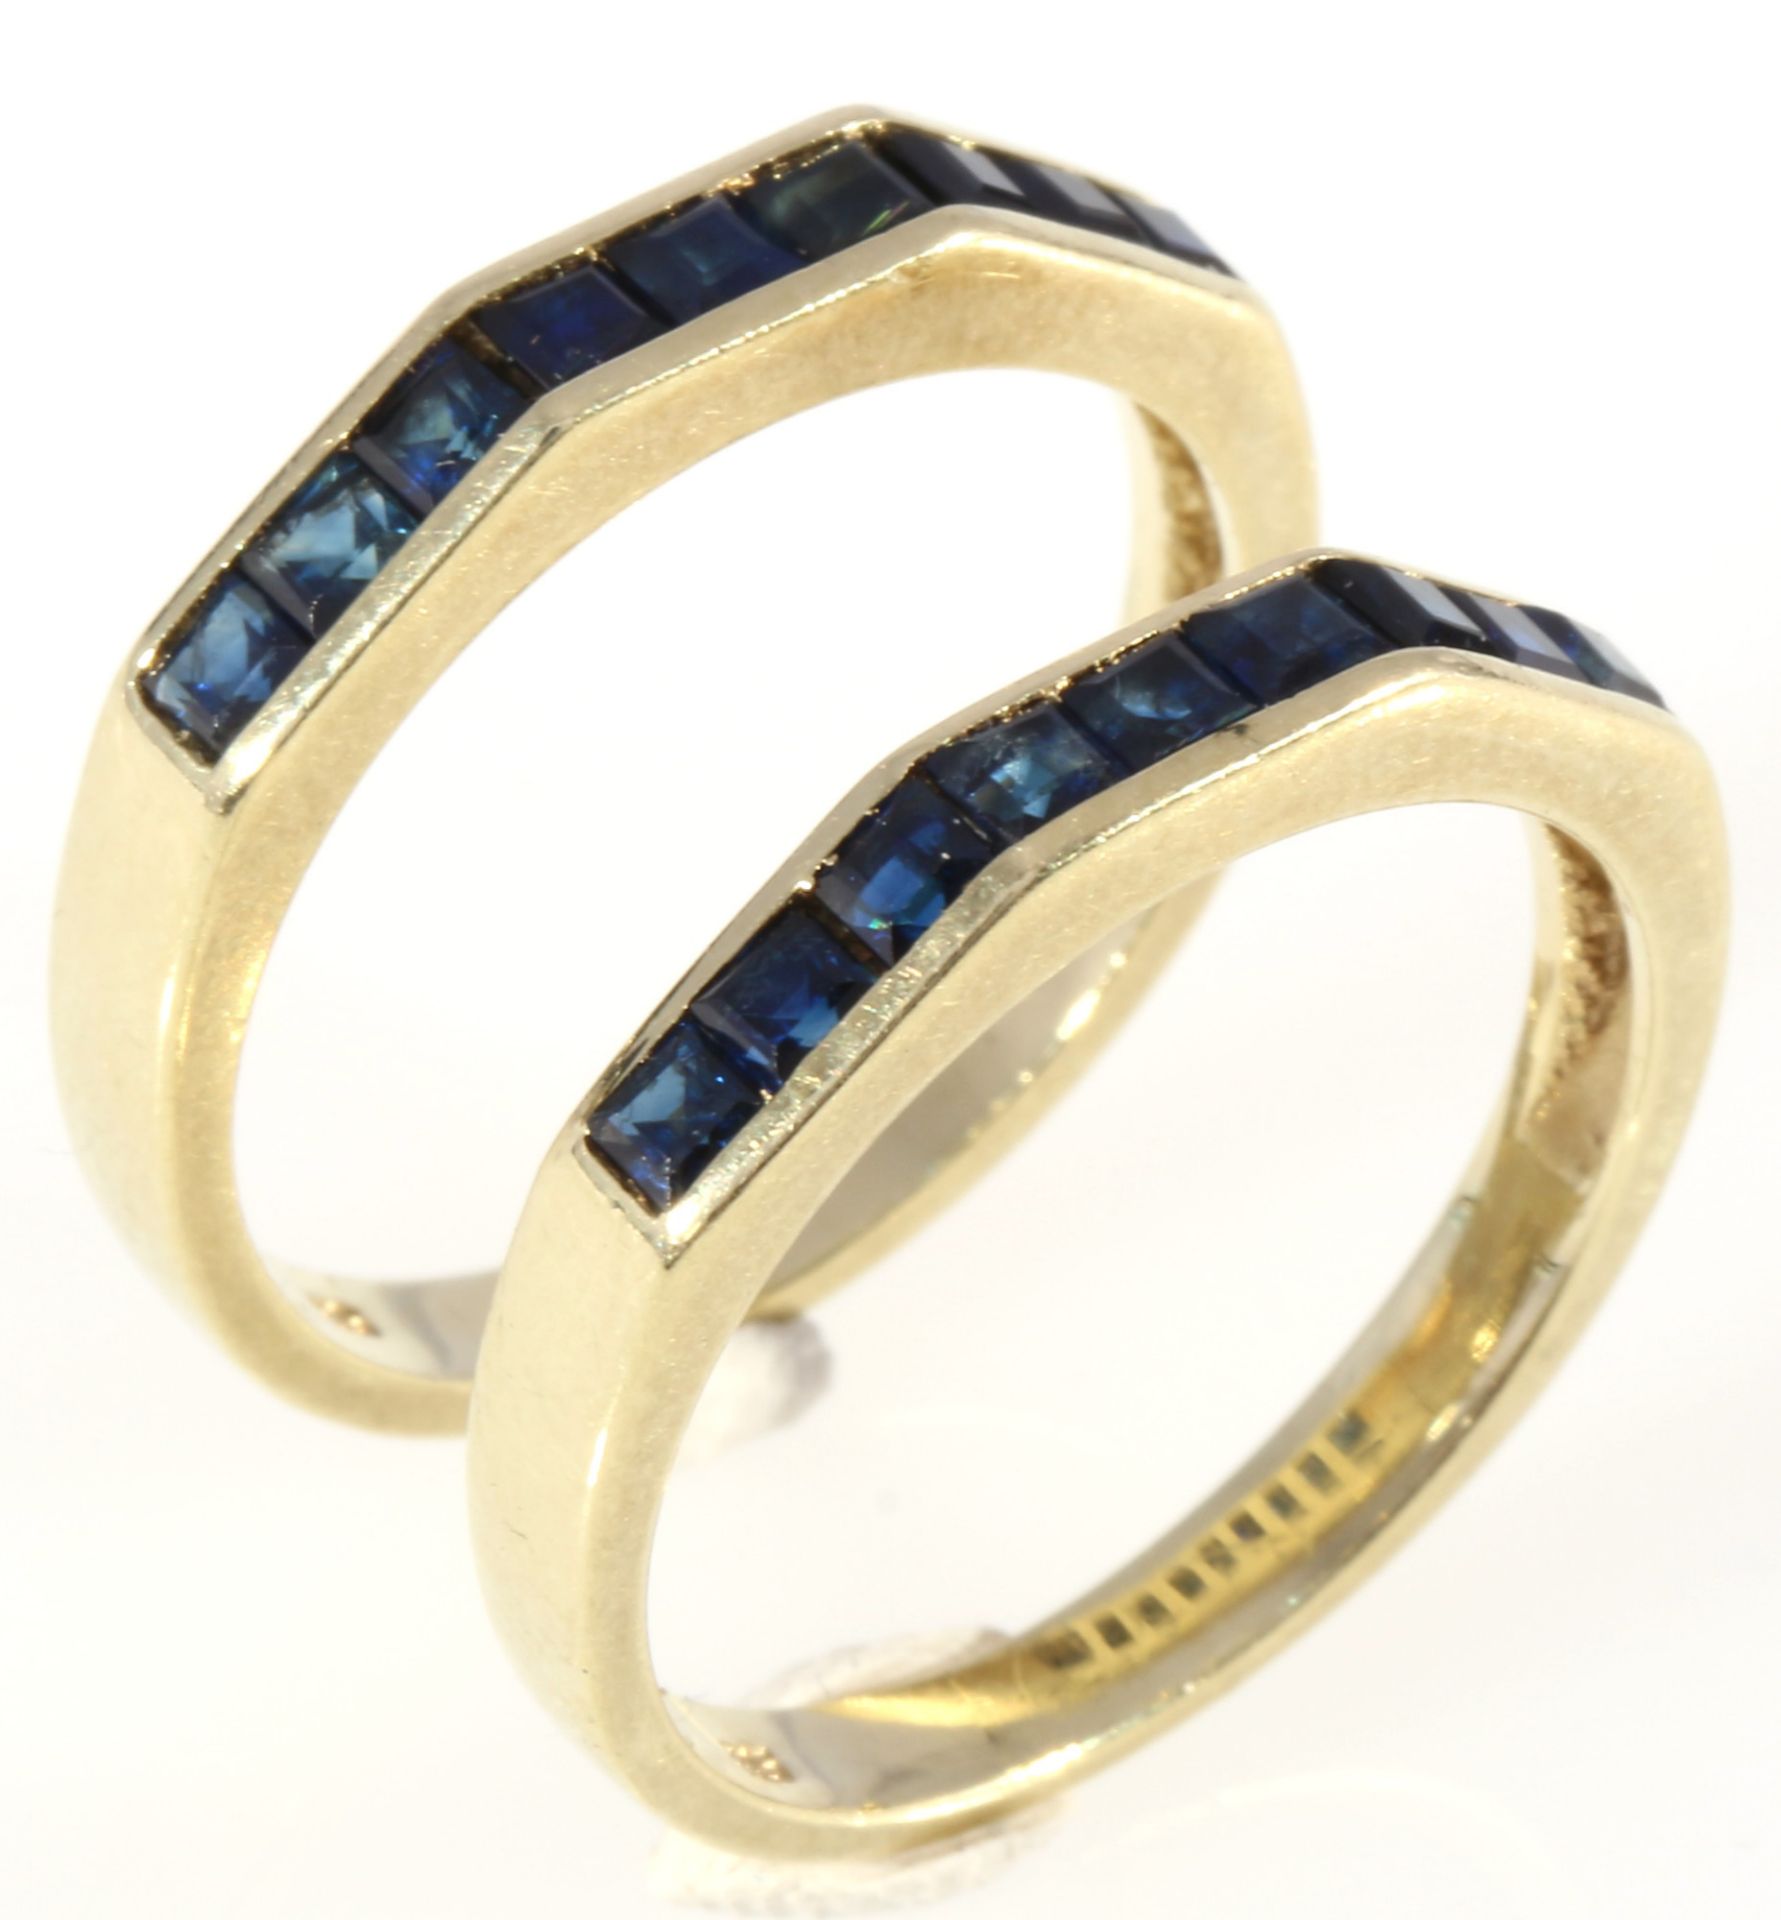 585 gold 2 rings with sapphires, 14K Gold 2 Ringe mit Saphiren,